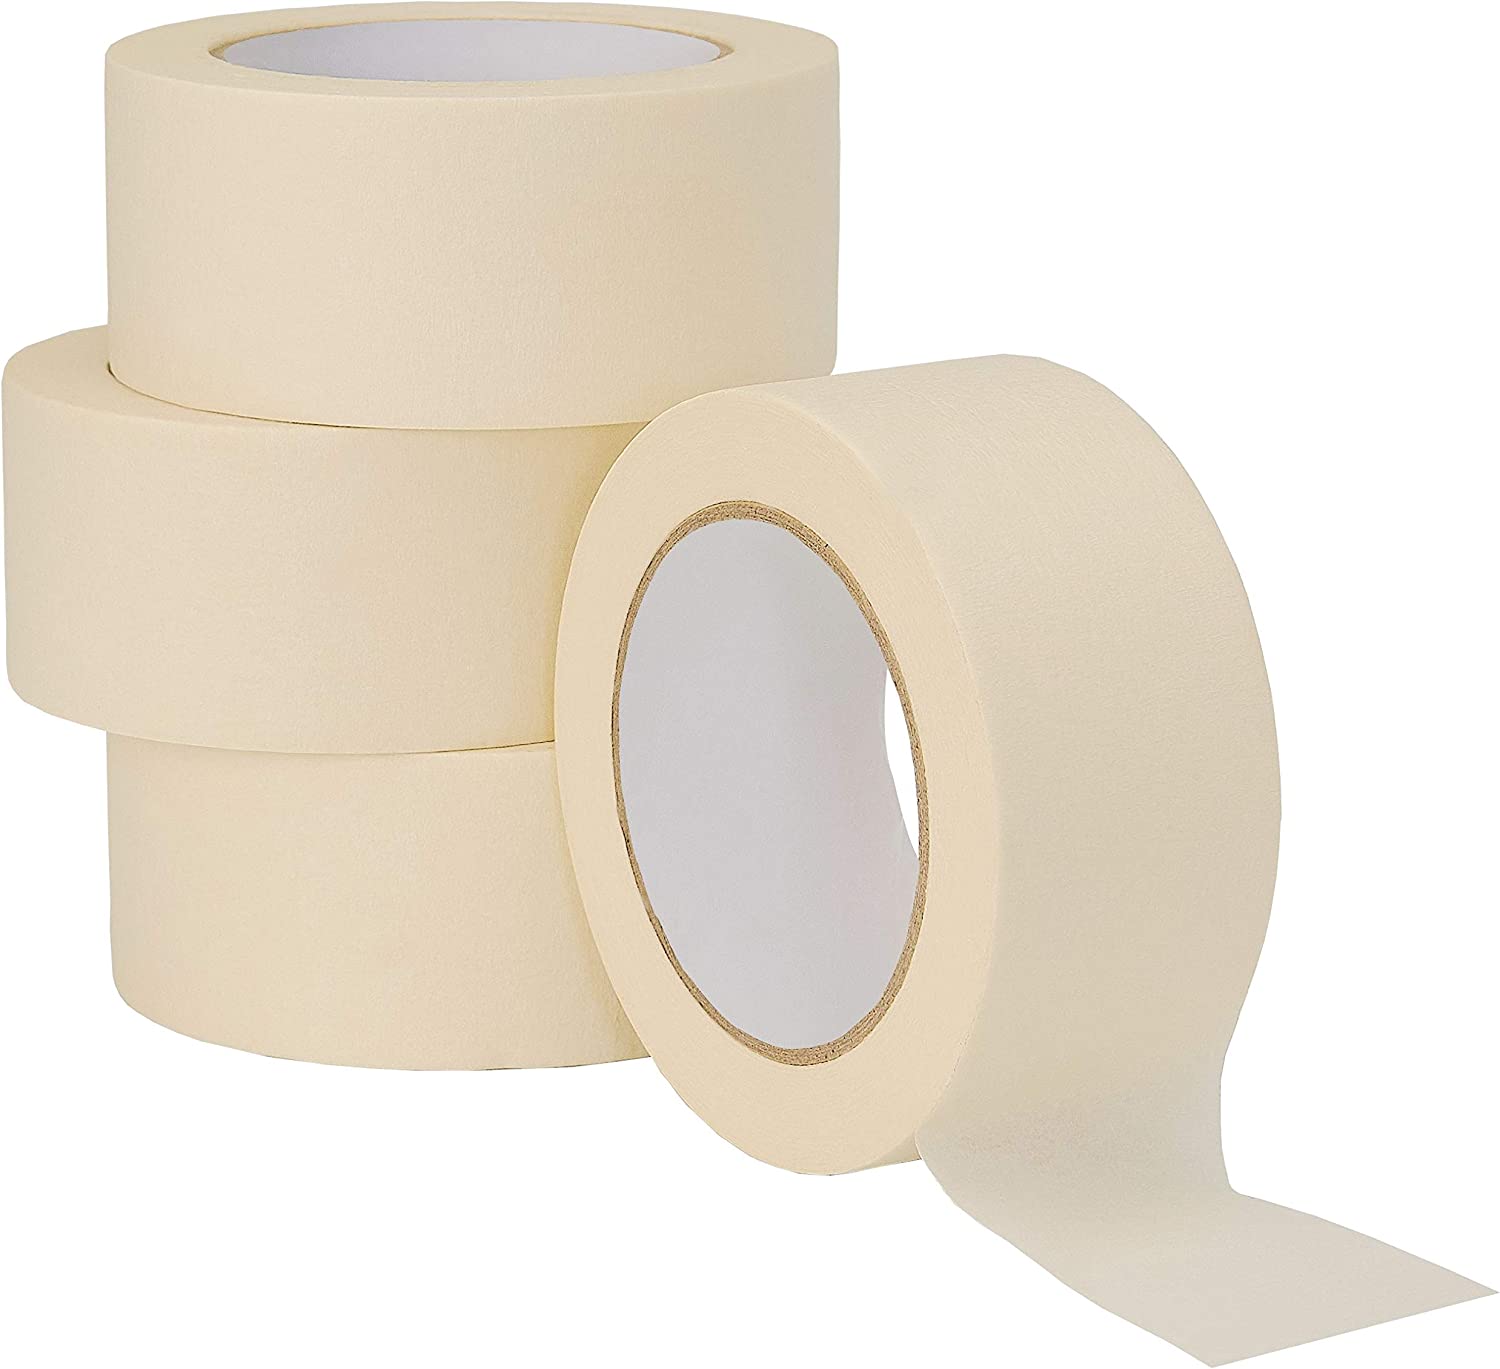 White Masking Tape 3 Pack General Purpose Beige Painter's Tape 0.7inch x  60yard 180 Yard In Total For Painting Labeling Packing Craft Art etc.